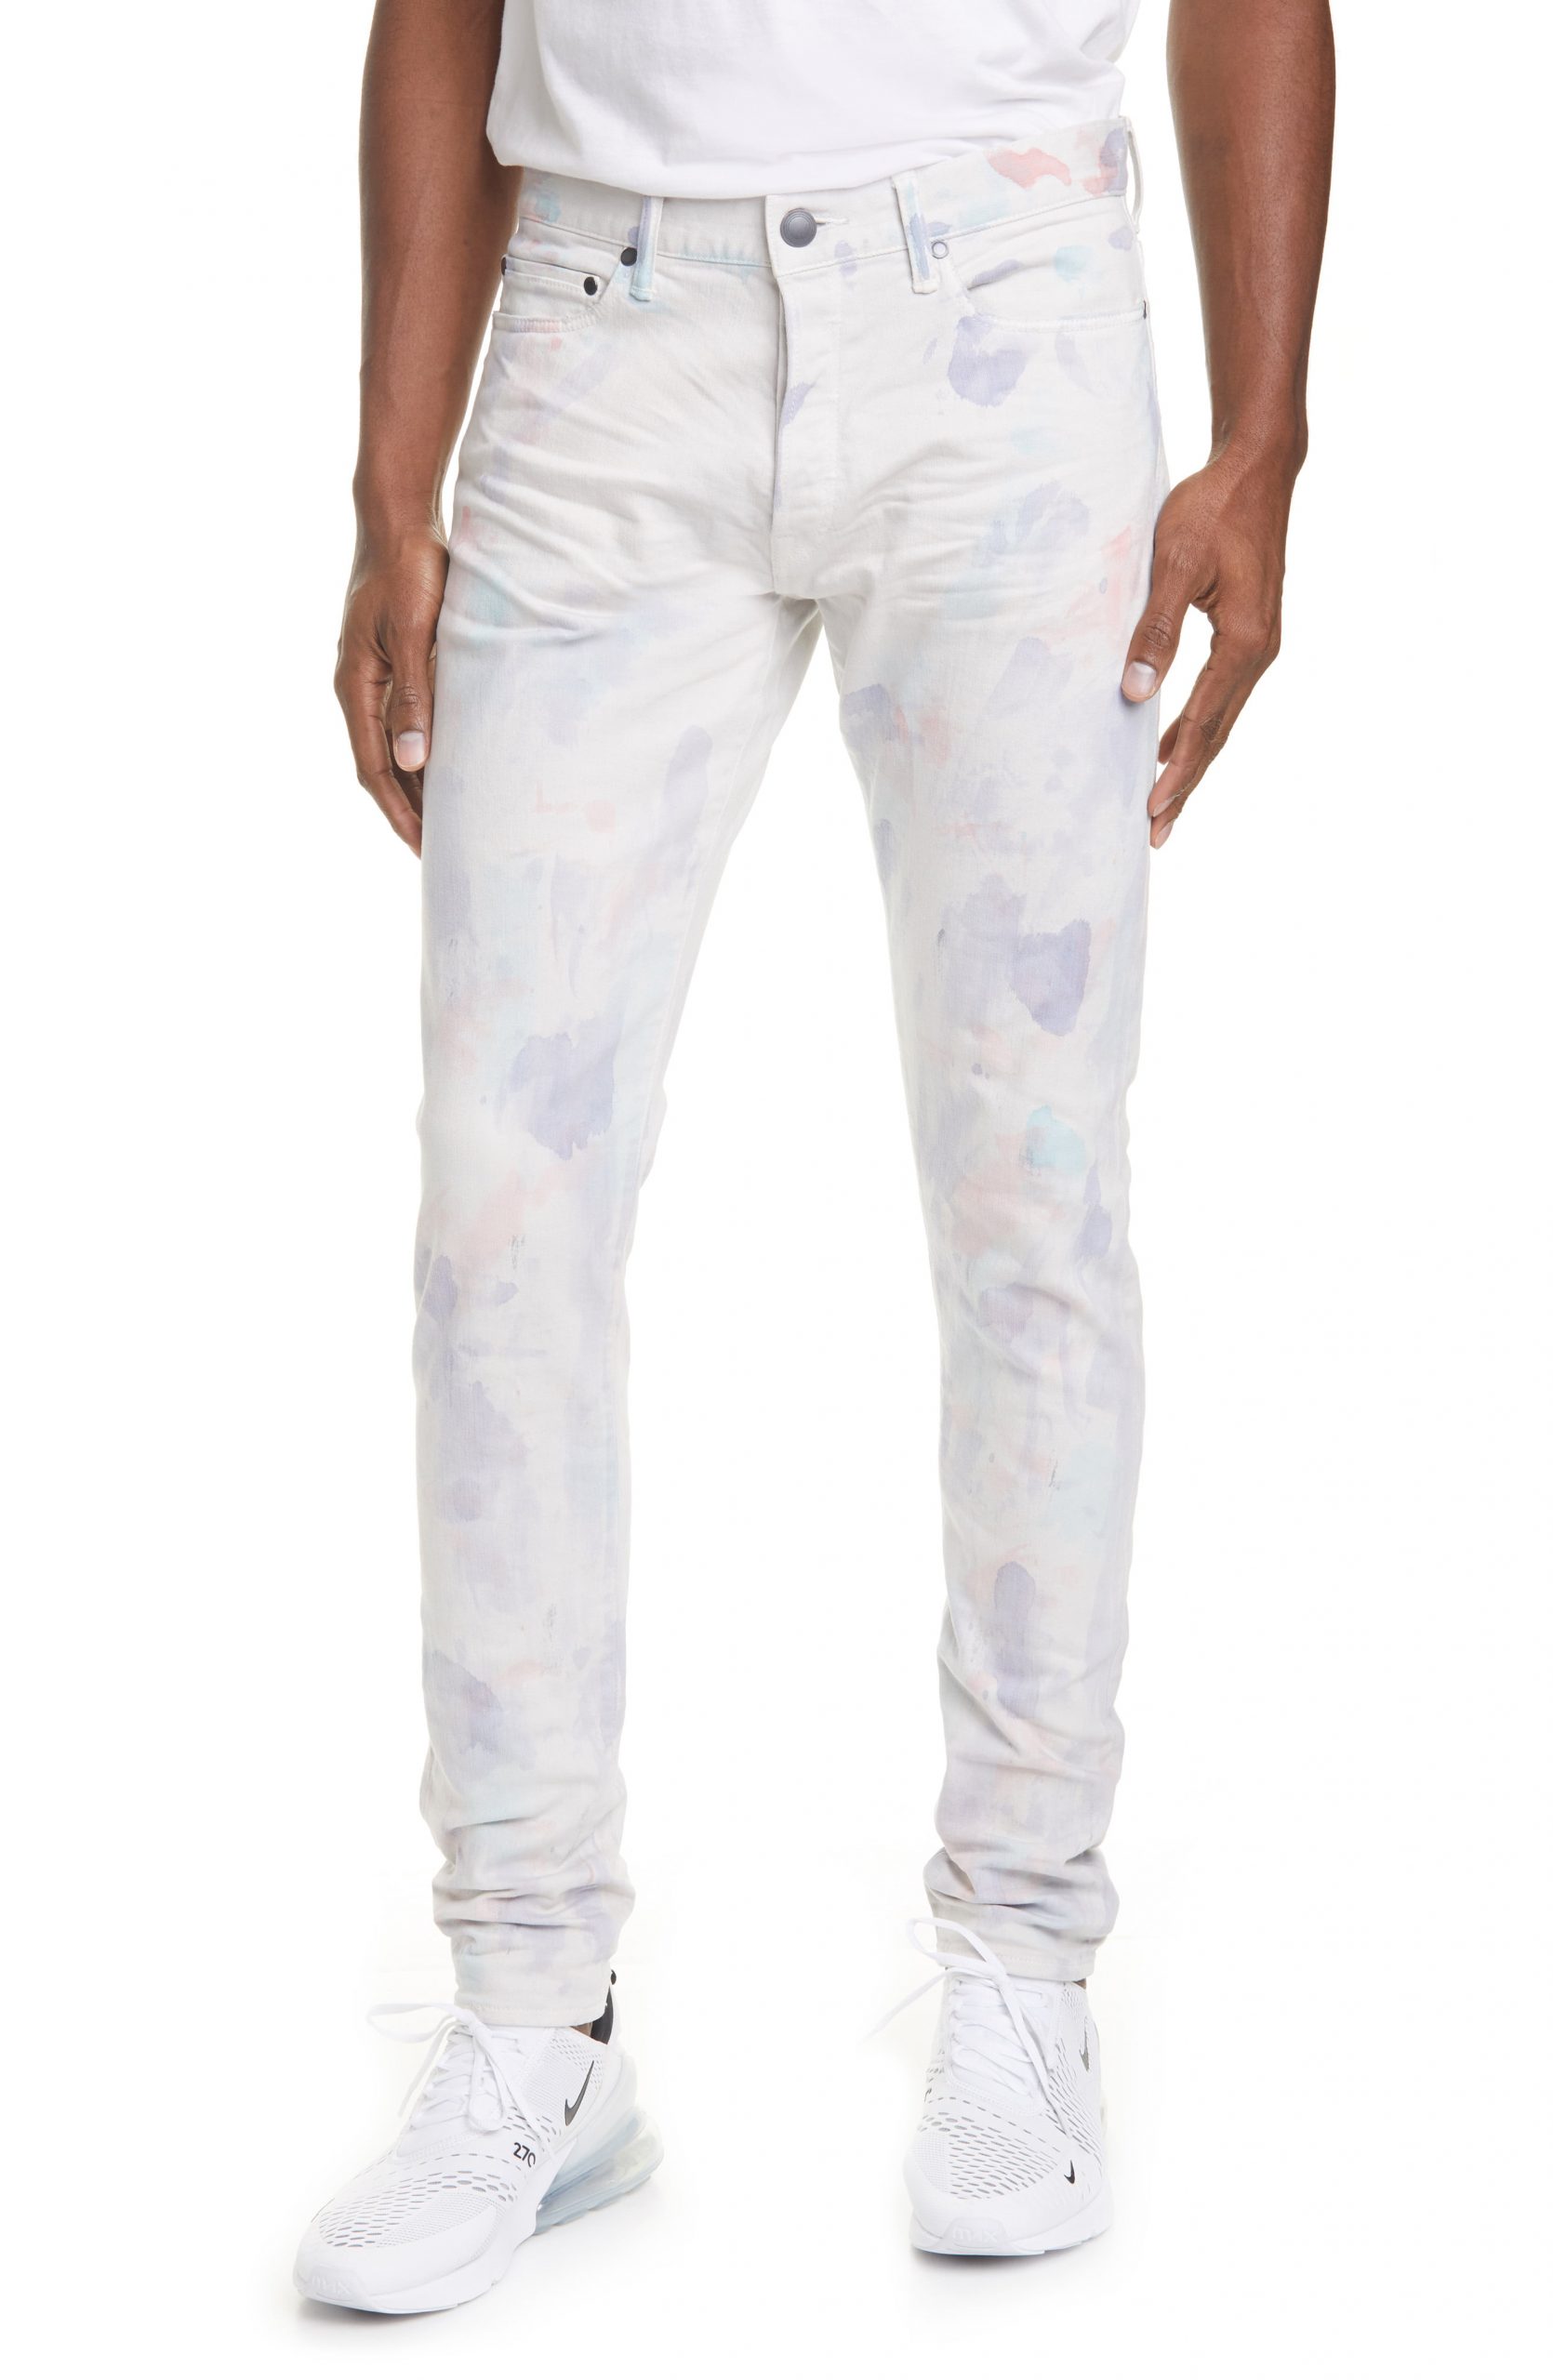 white cut up jeans mens